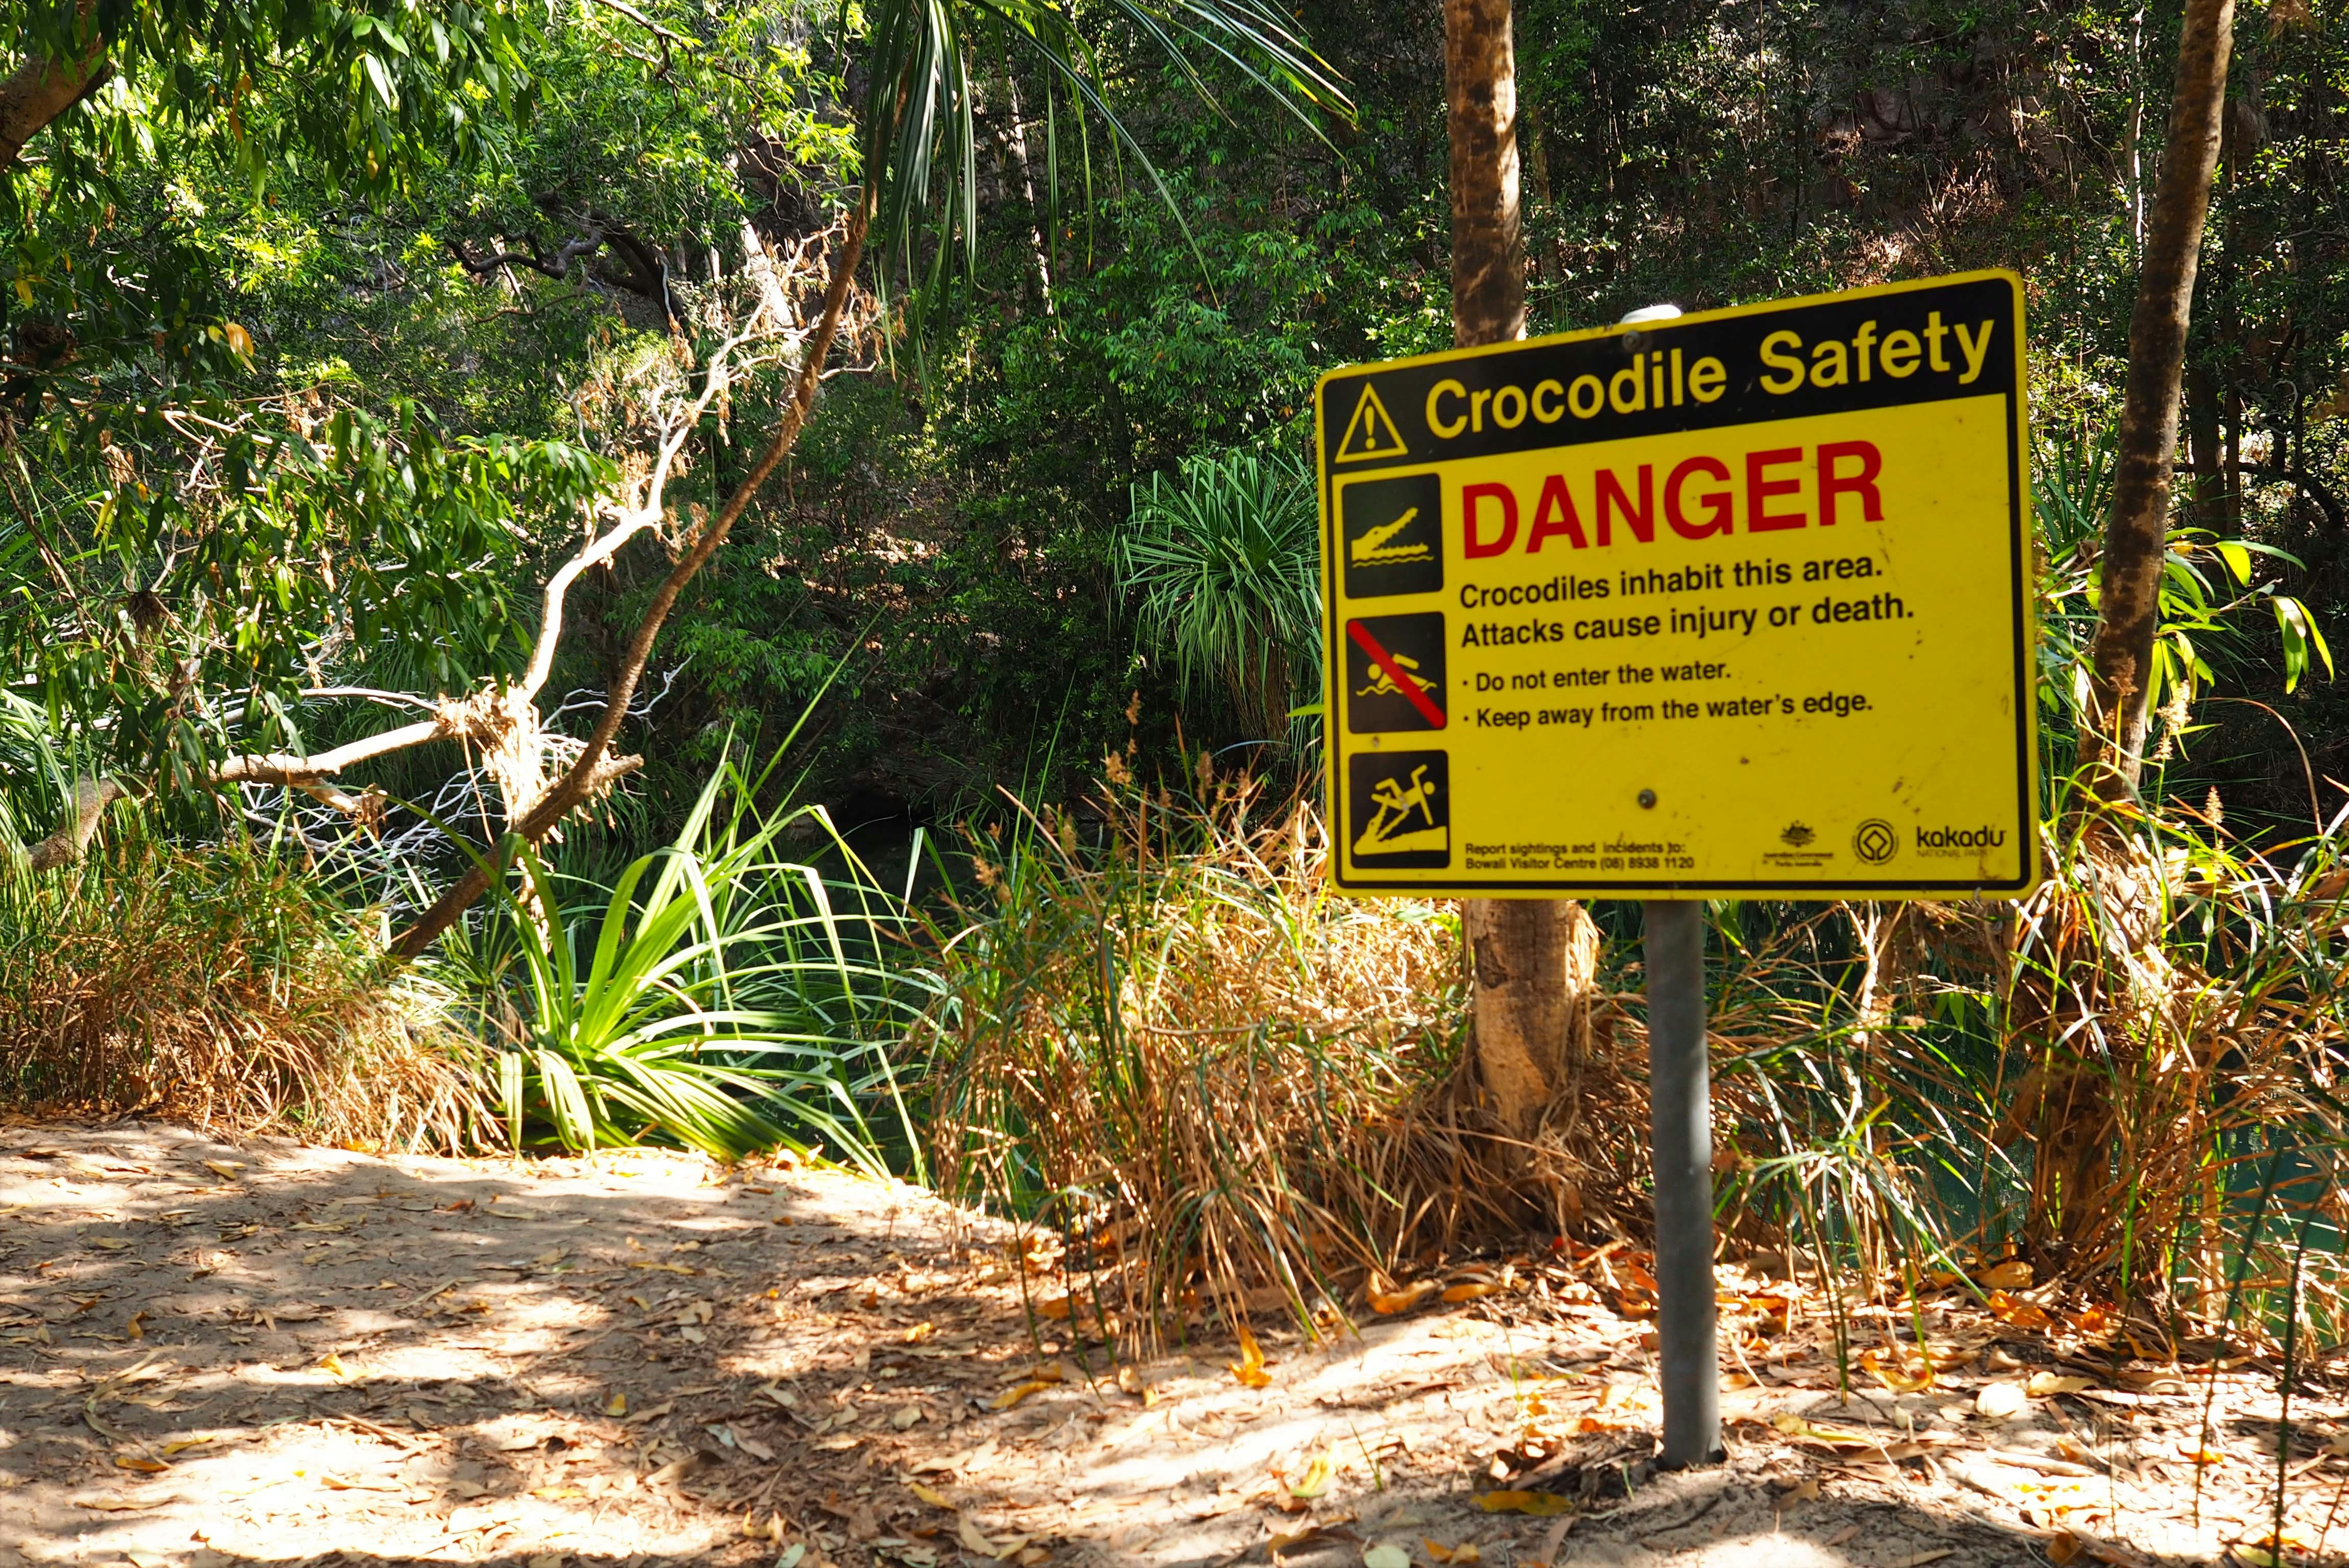 Signs warning of crocodile danger by Sarah Reid / Lonely Planet